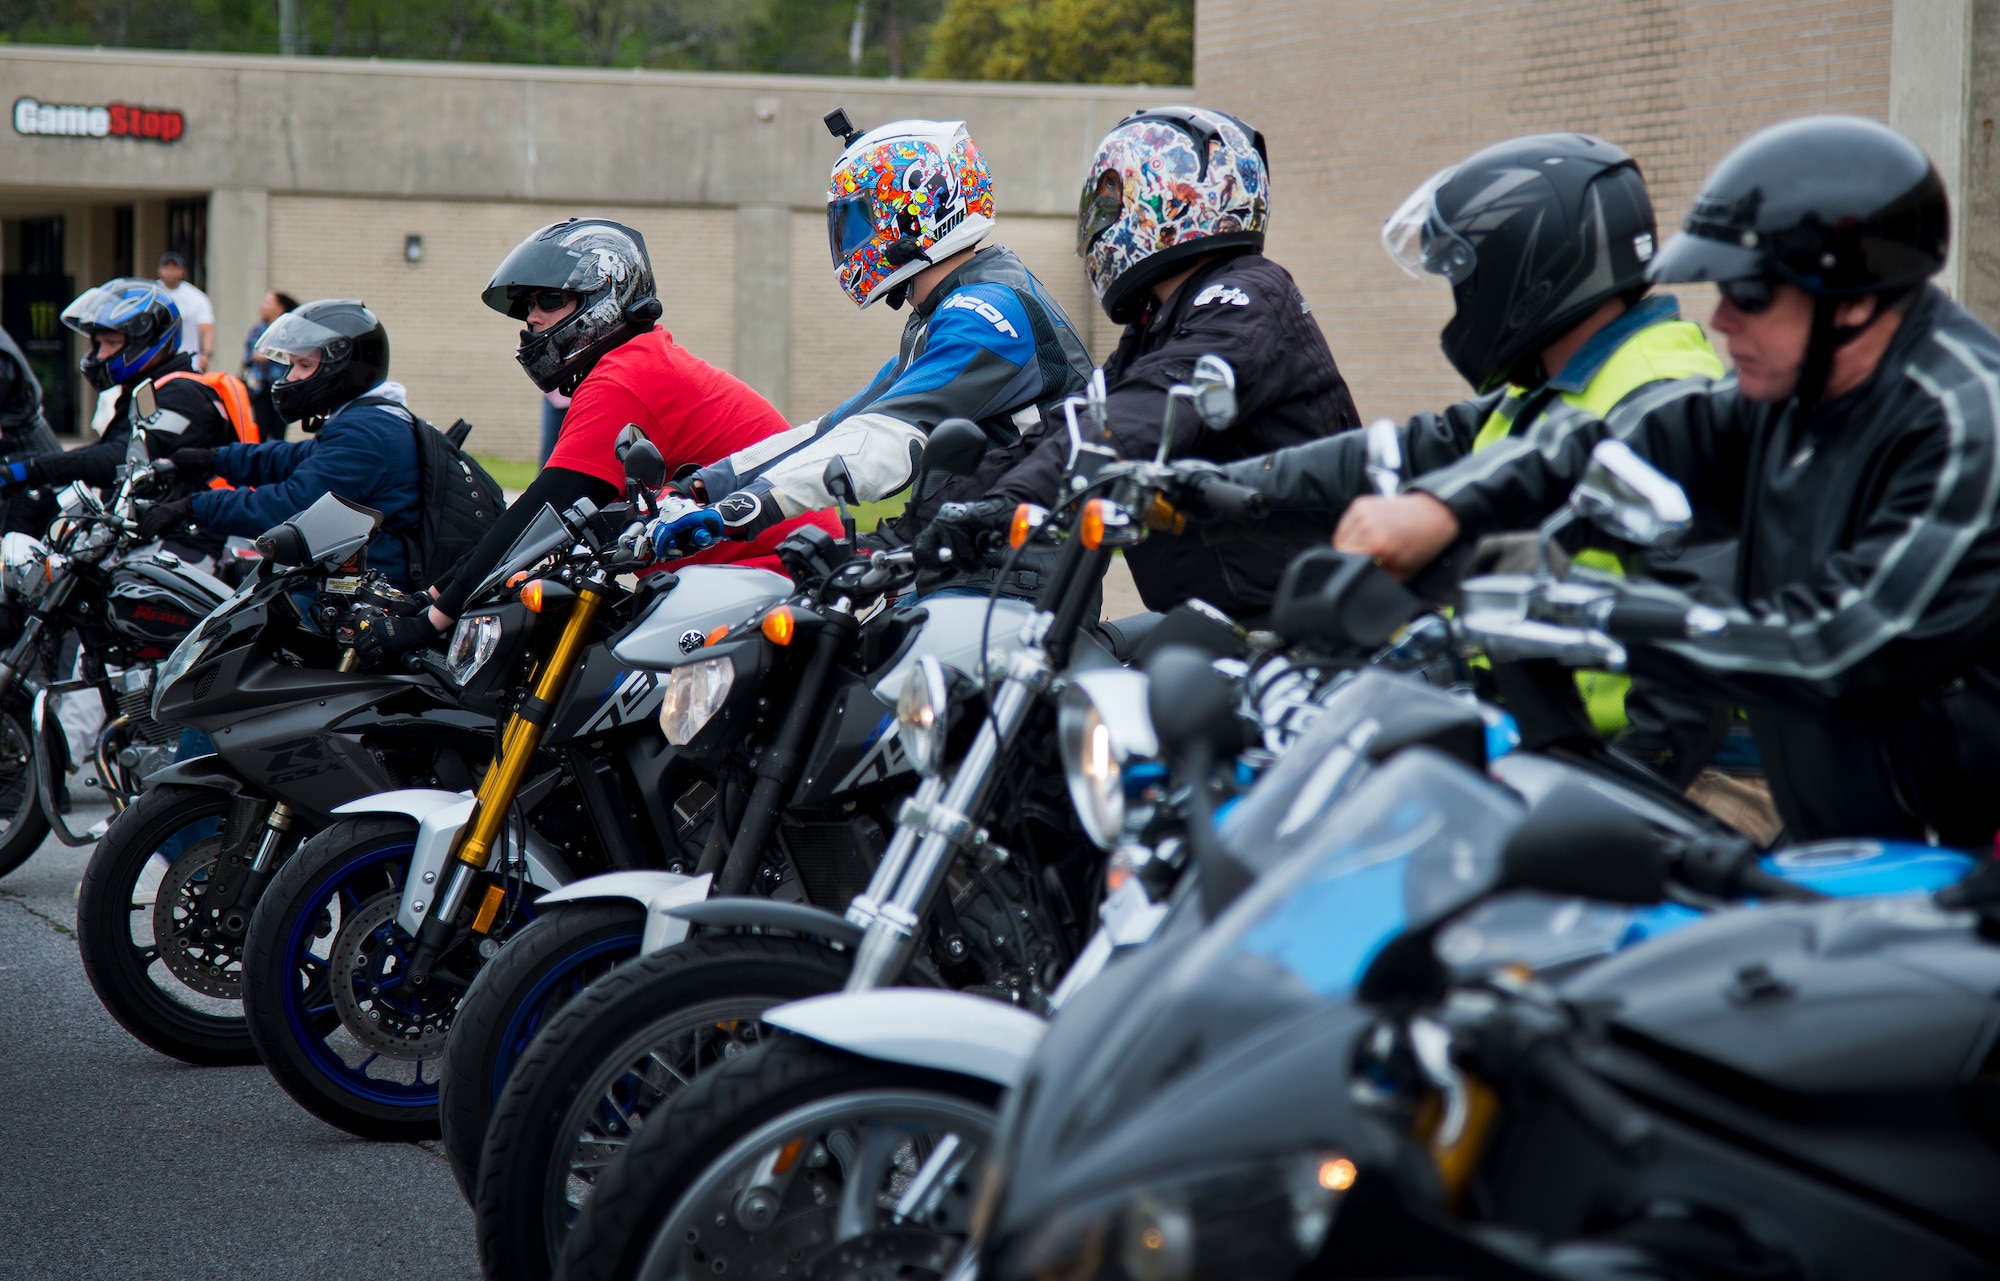 Bikers wait to begin their group ride after the base’s annual motorcycle safety rally April 15 at Eglin Air Force Base, Fla.  More than 500 civilian and military riders rode in for the joint 53rd Wing/96th Test Wing event. (U.S. Air Force photo/Samuel King Jr.)